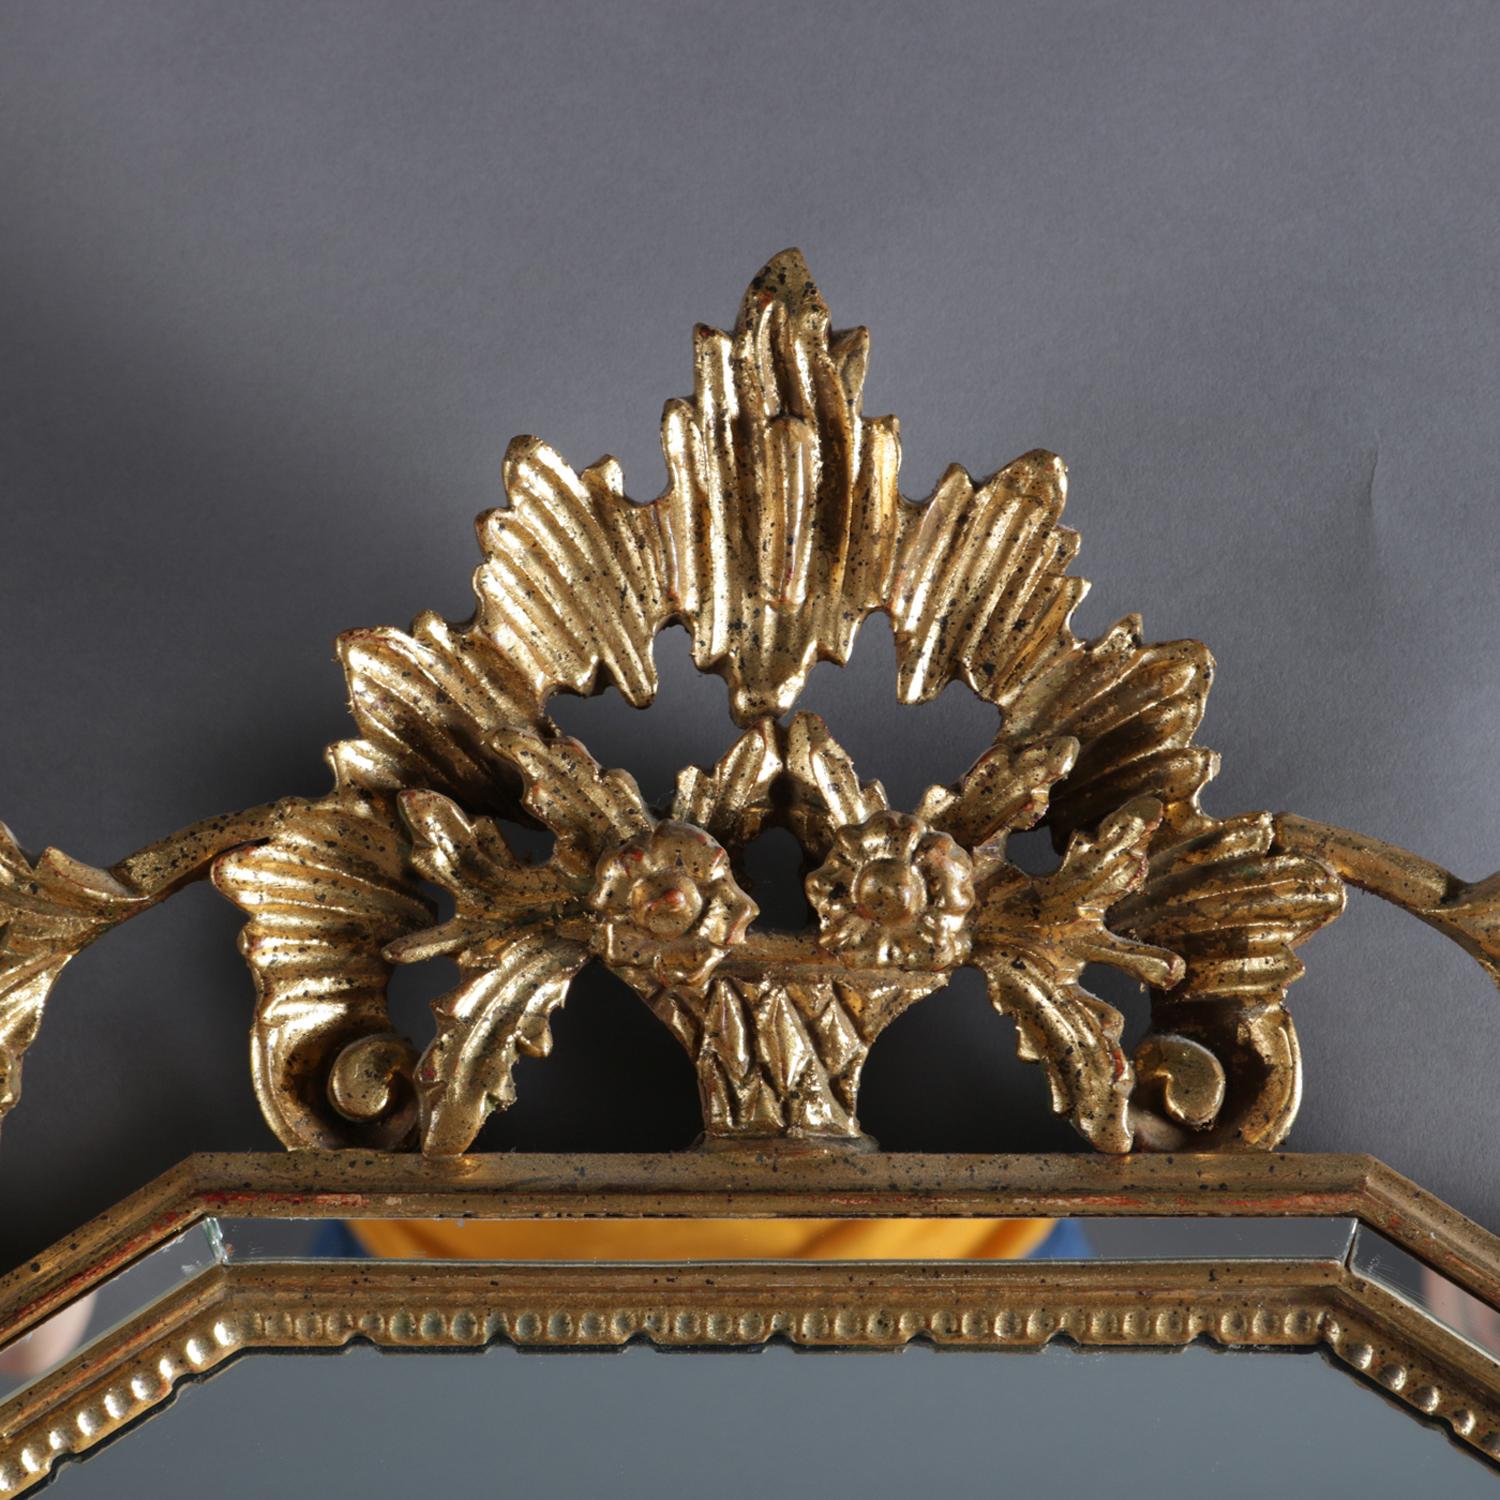 Antique French Louis XIV style parclose wall mirror features giltwood frame with pierced corbeille a fleurs (basket of flowers) crest with flanking foliate and floral form surround decoration, mirror with narrow paneled border, and base with scroll